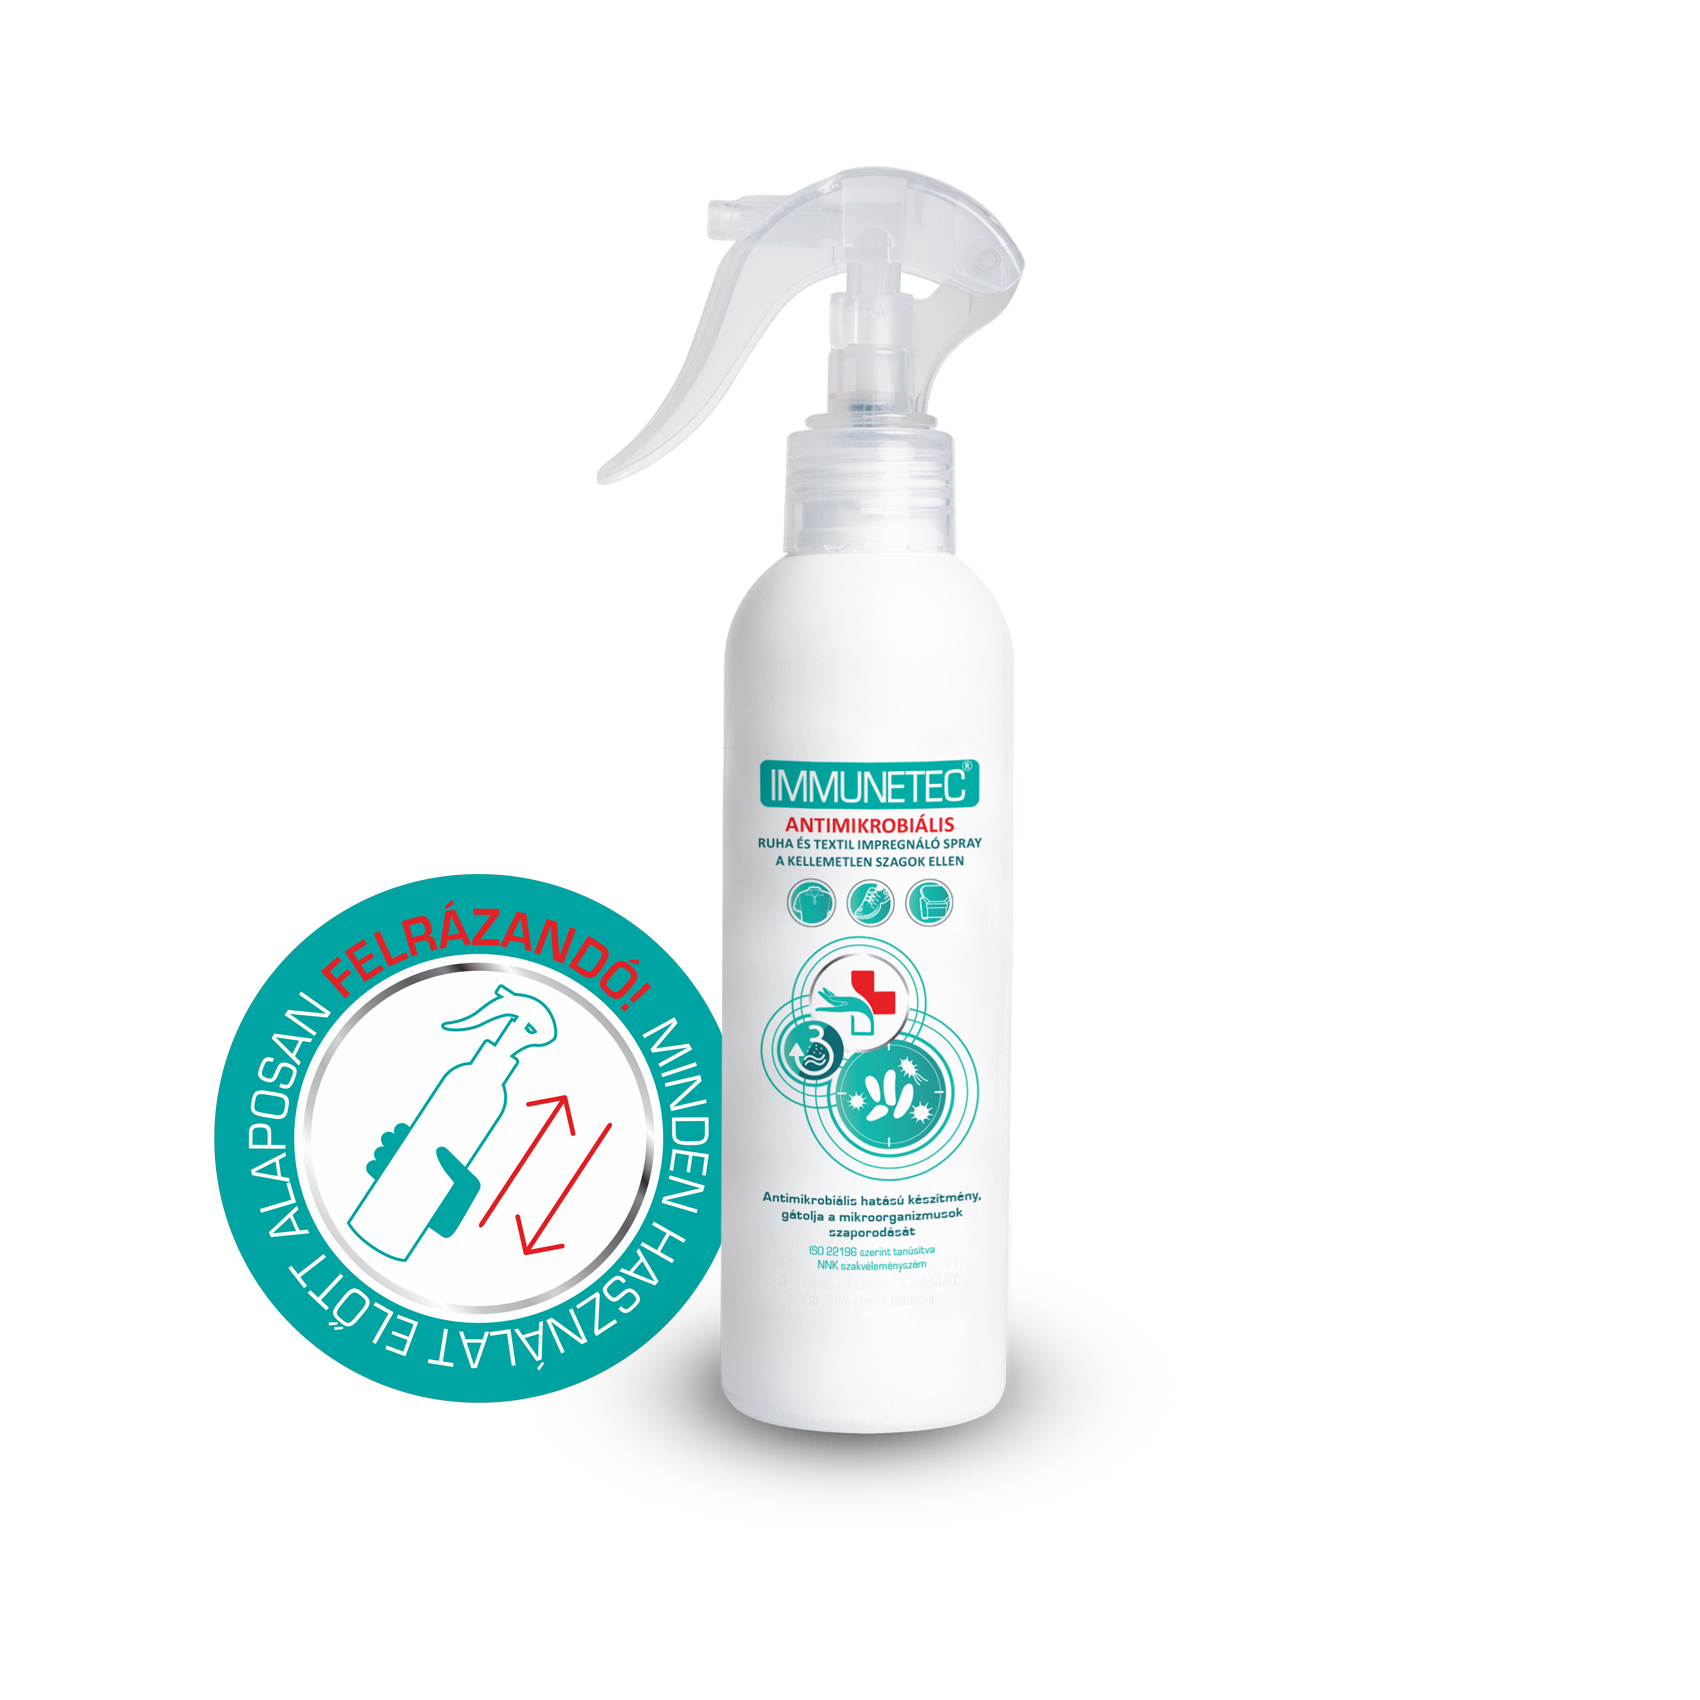 You can find Immunetec antimicrobial disinfectant fabric spray in the following shops: